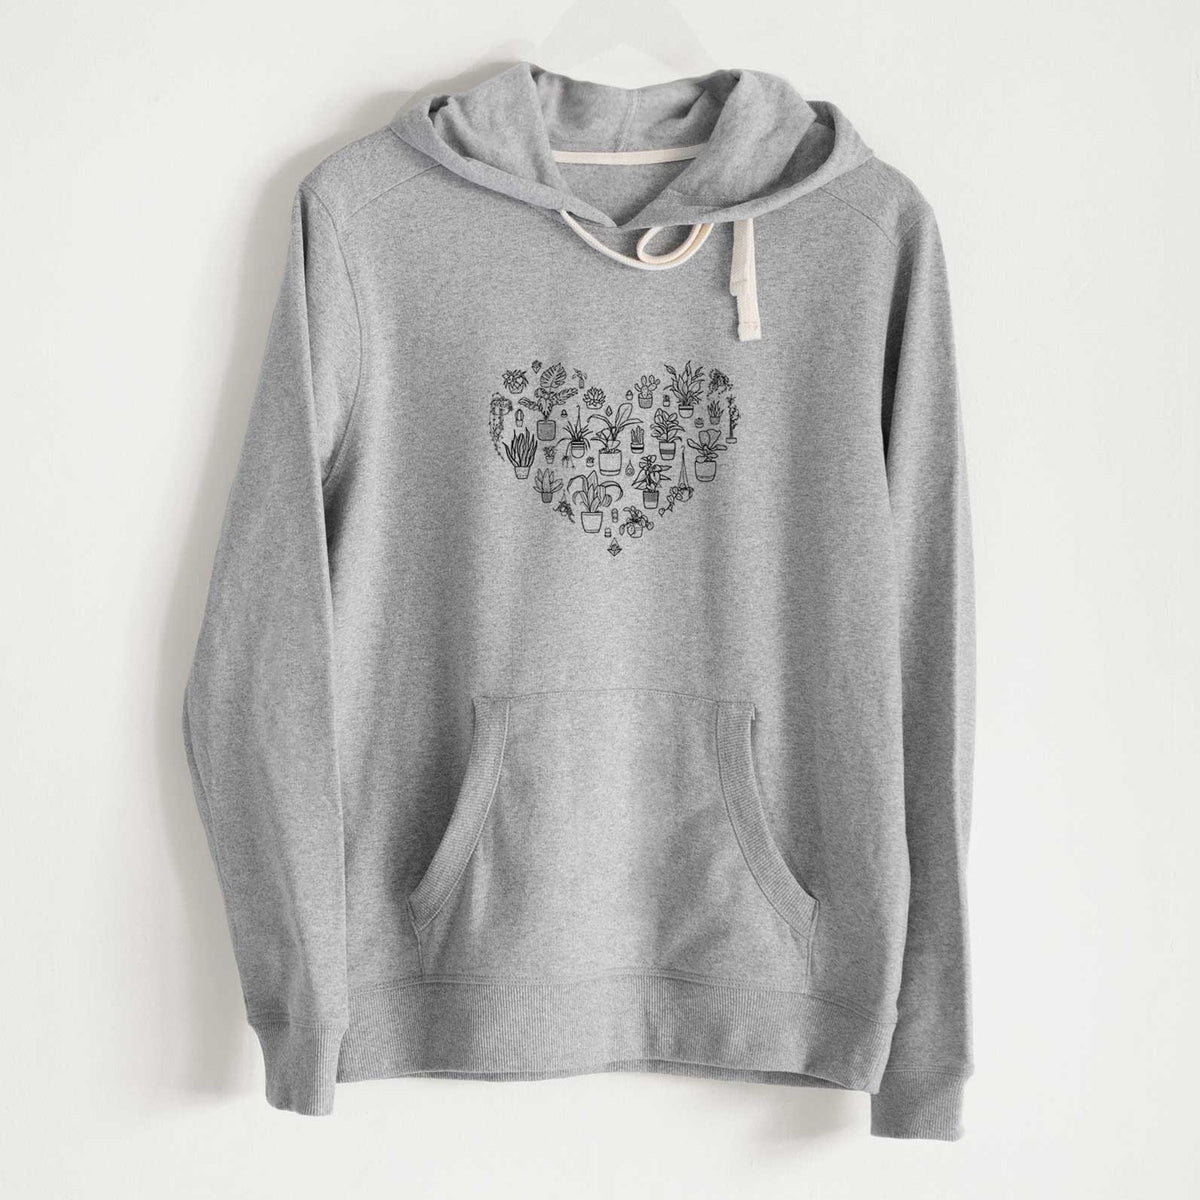 Heart Full of House Plants - Unisex Recycled Hoodie - CLOSEOUT - FINAL SALE